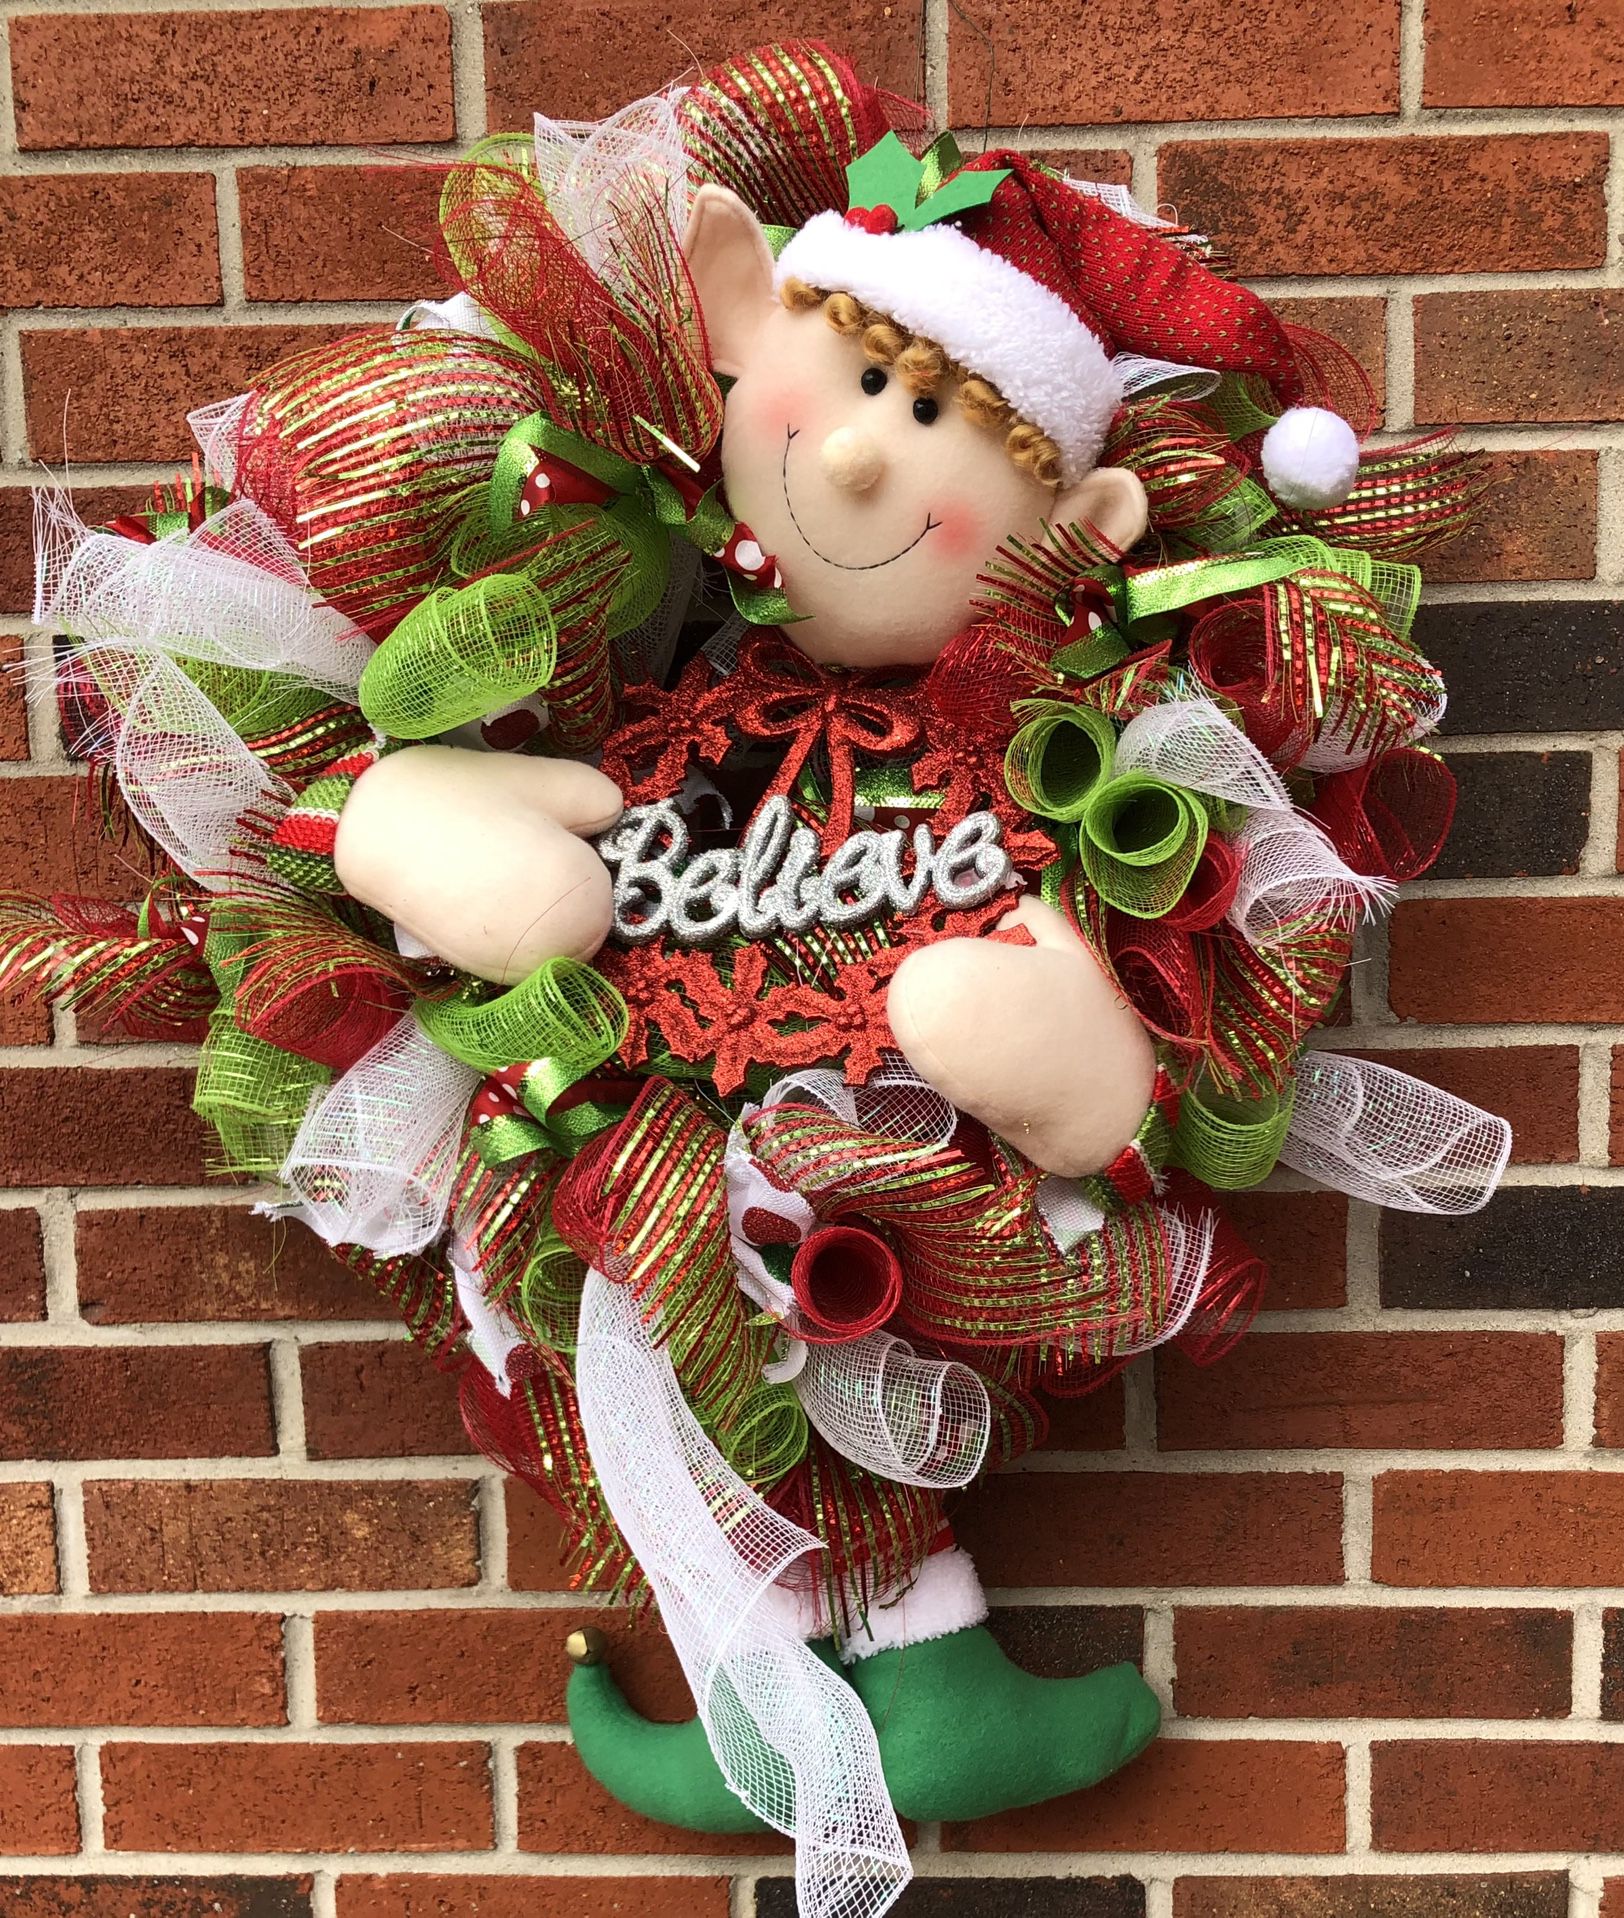 CHRISTMAS WREATH WITH HOLIDAY ELF IN CENTER